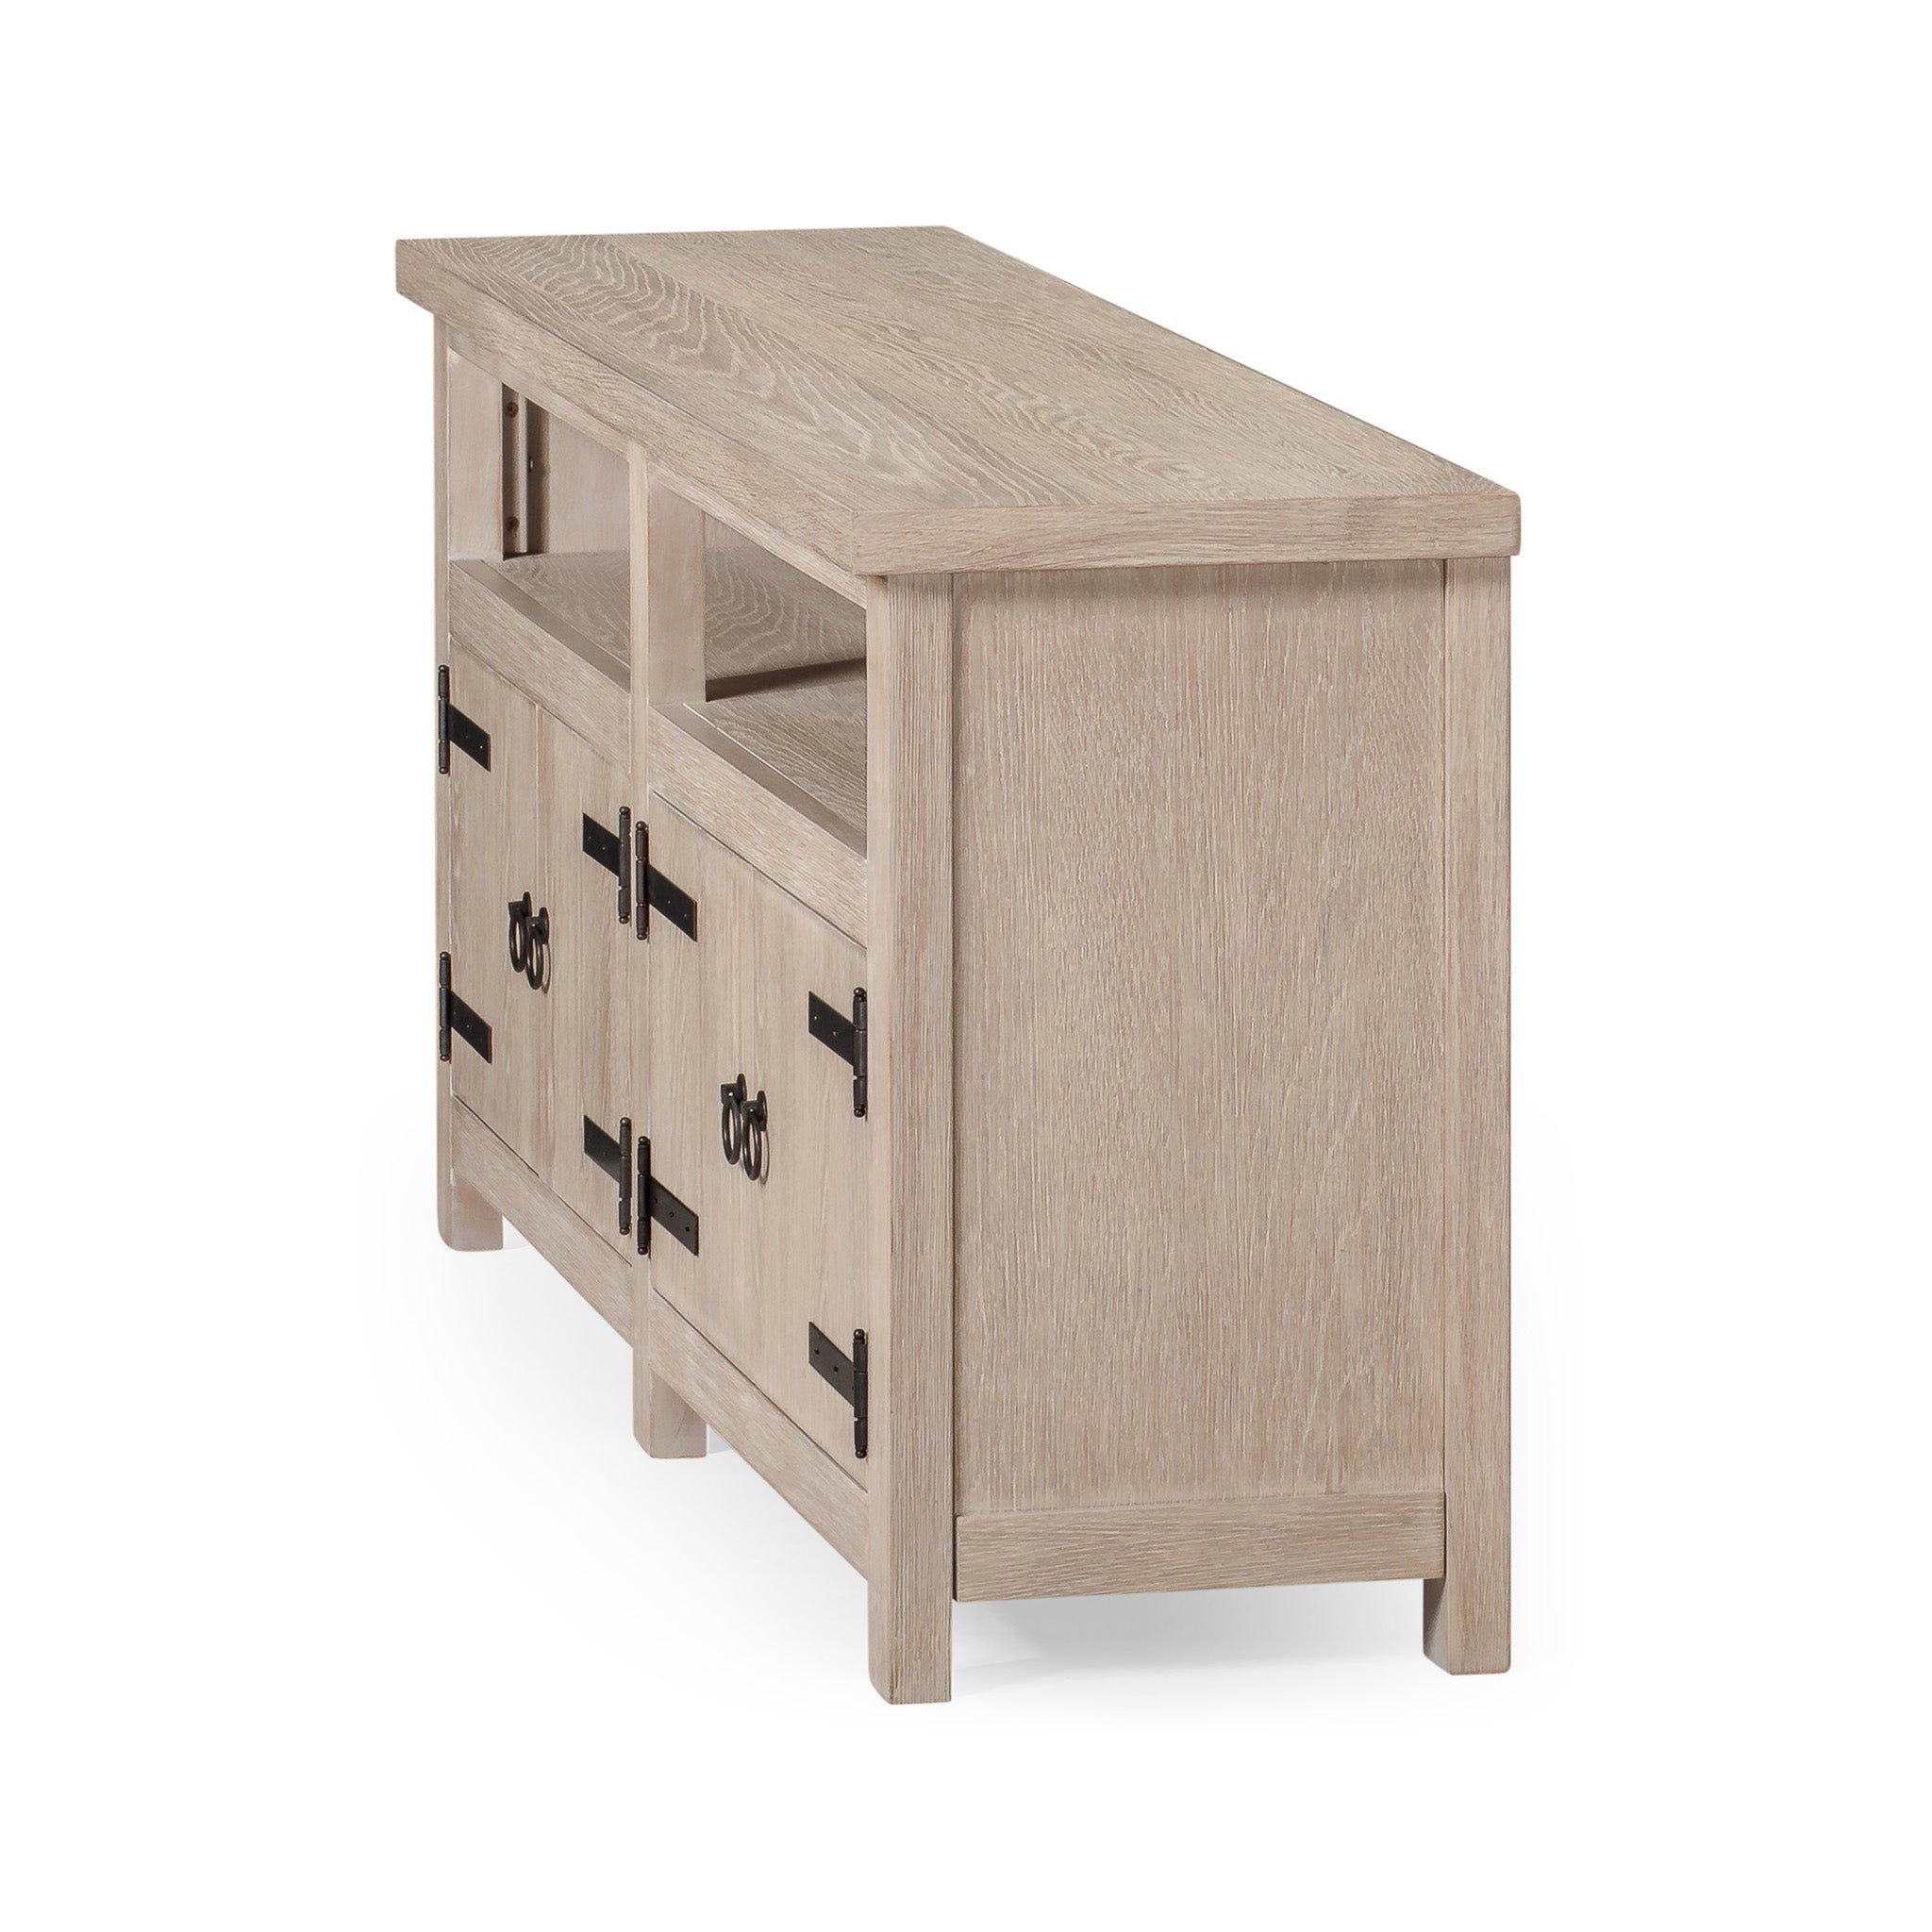 Luca Organic Wooden Media Unit in Weathered White Finish in Media Units by Maven Lane